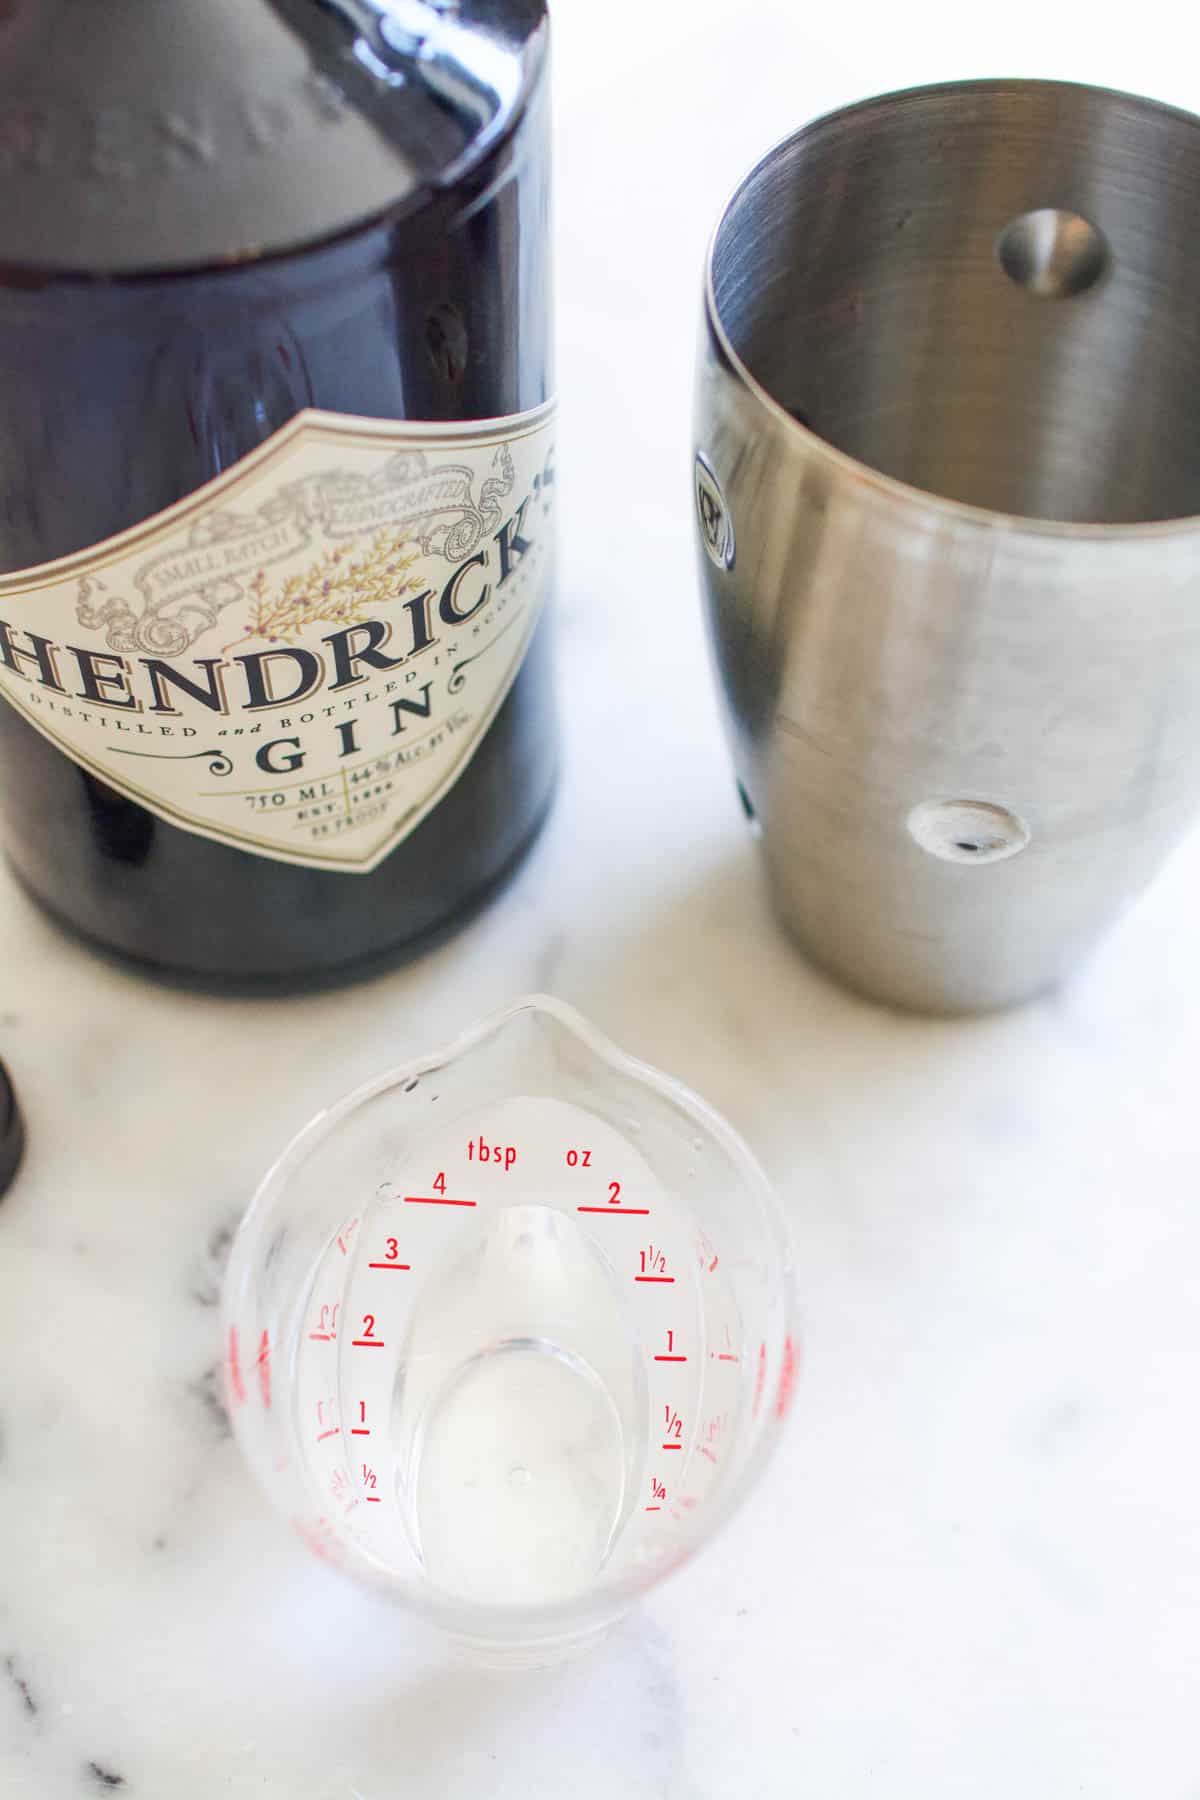 A measuring cup of gin next to a bottle of Hendrix gin and a cocktail shaker.